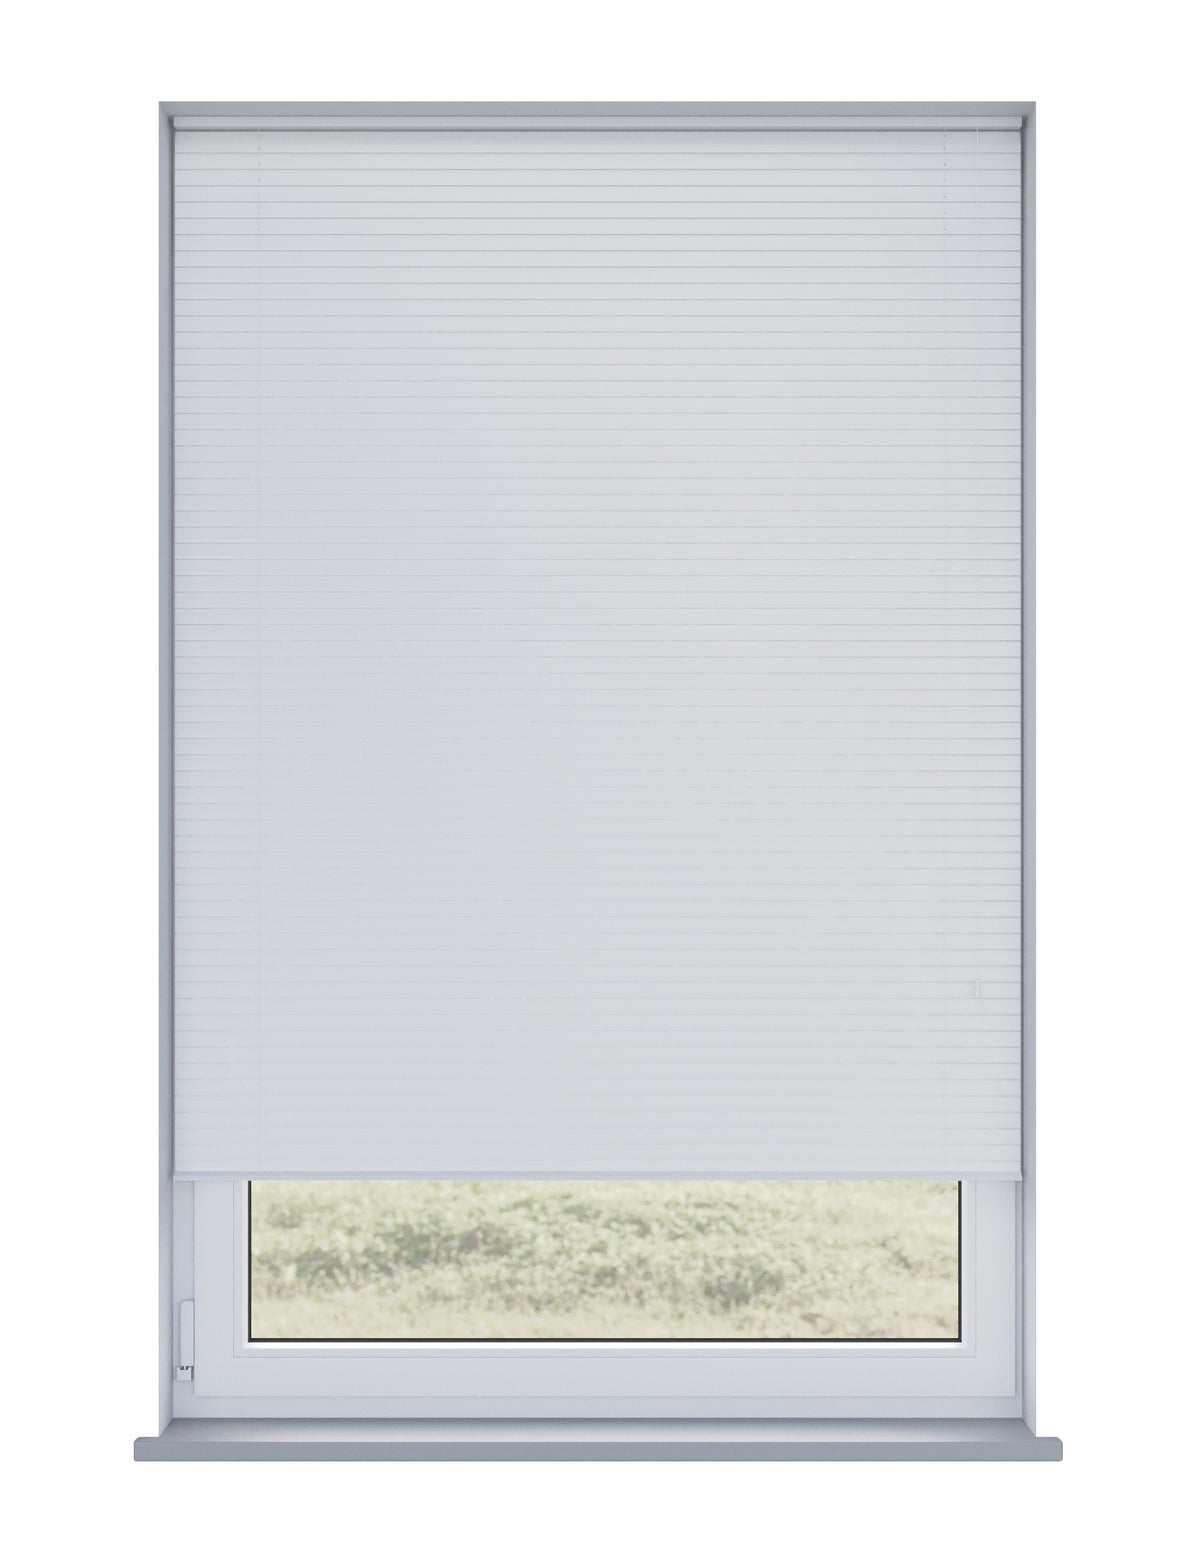 Expressions Zenith White Wooden Blind